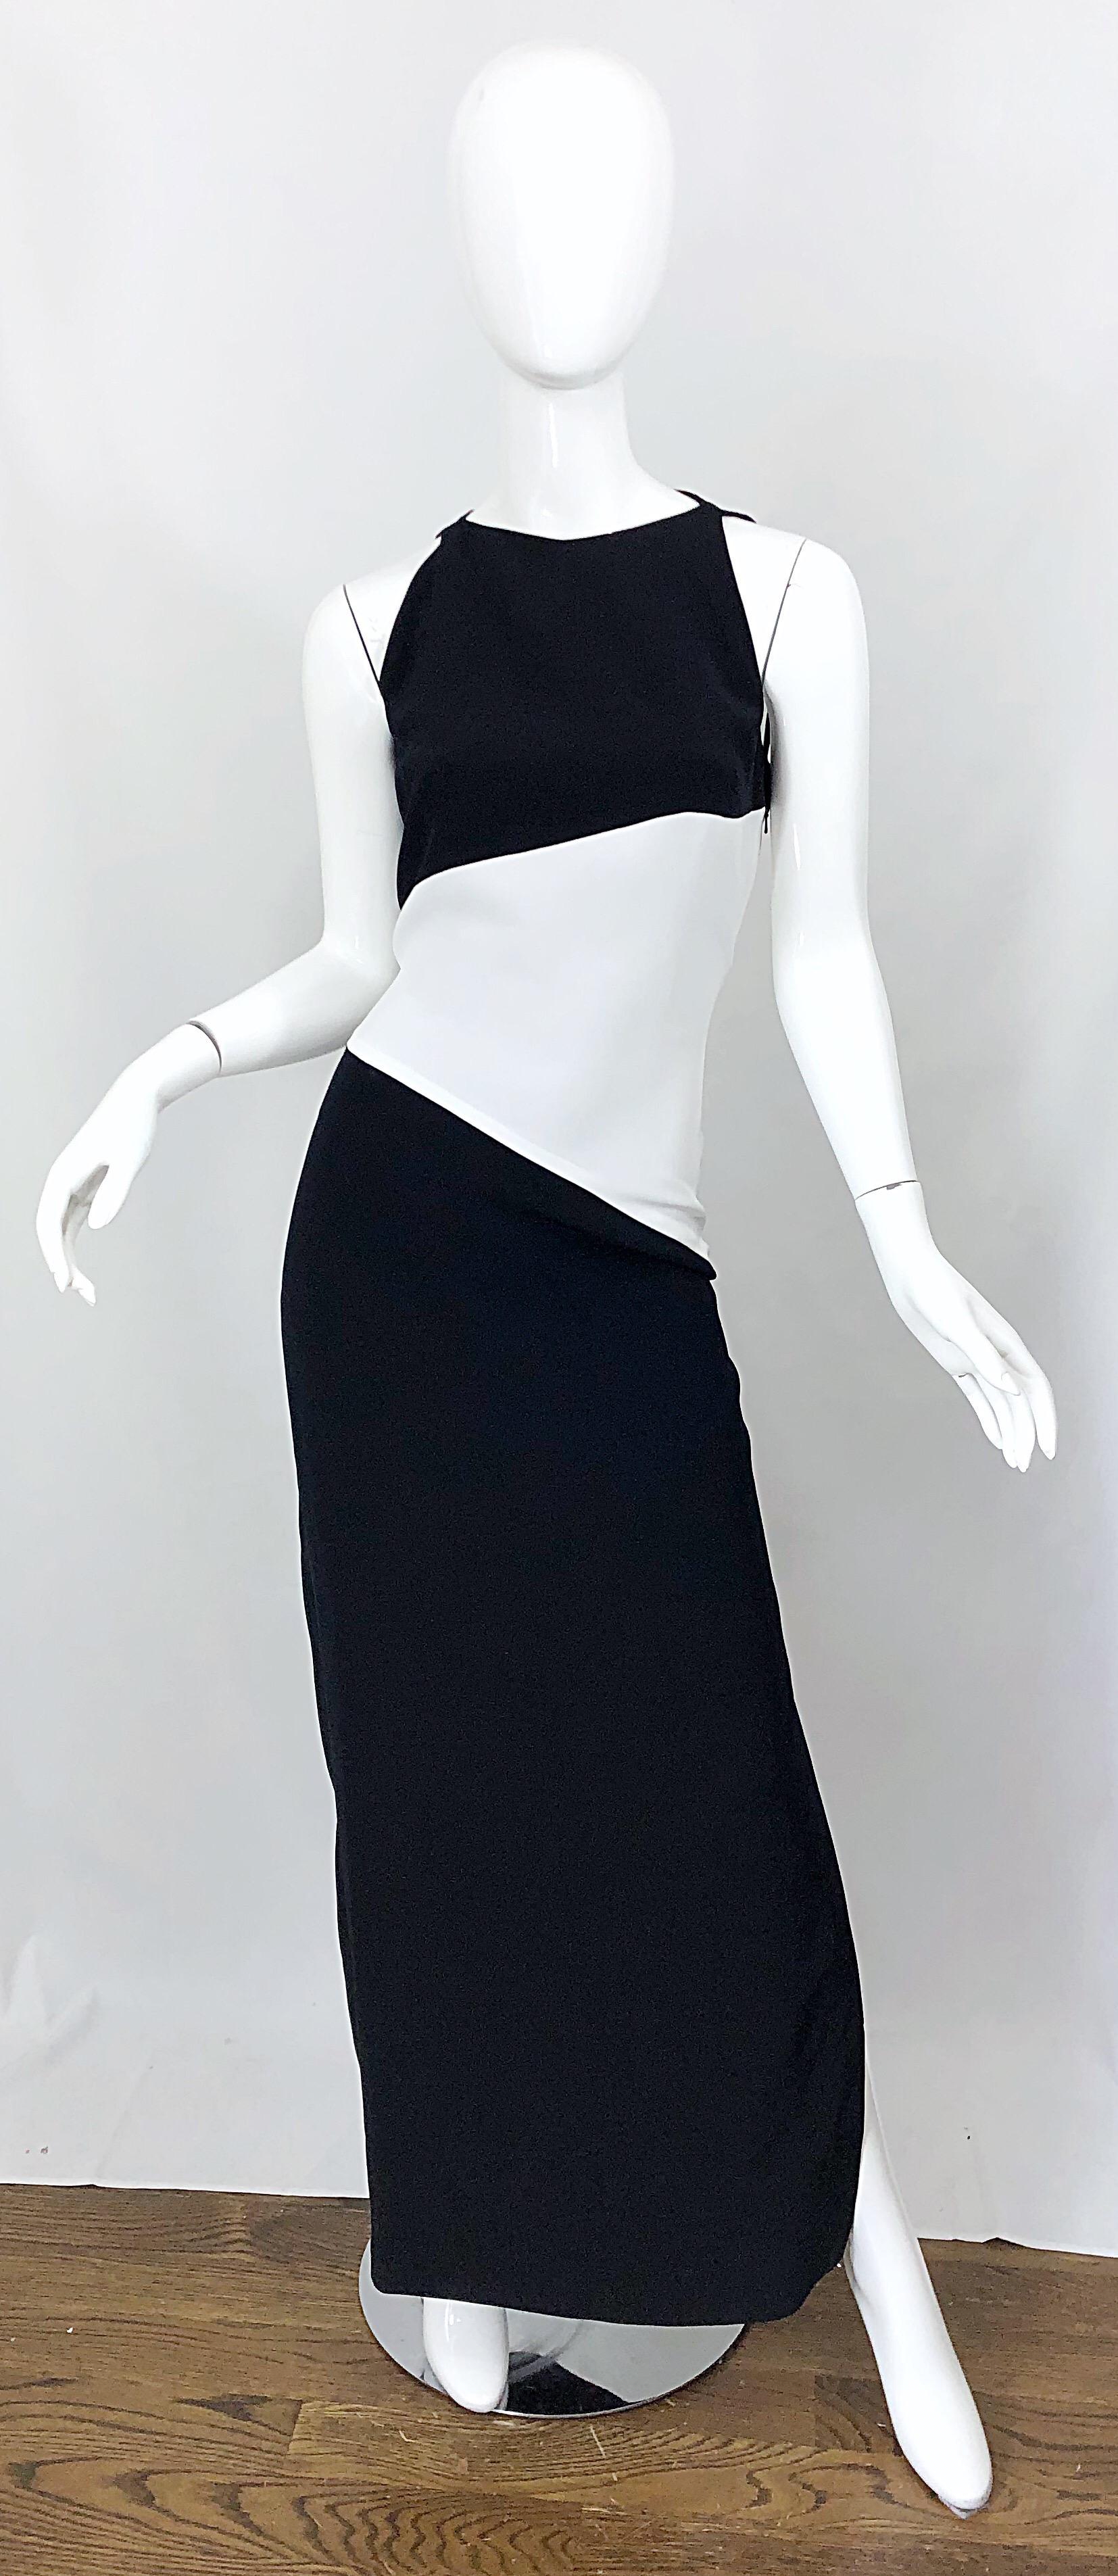 Beautiful and flattering brand new with original store tags vintage BOB MACKIE black and white color block Size 8 evening gown! Features blak crepe at bust, white crepe at waist, and black crepe skirt. High neck with a slit at the left leg that